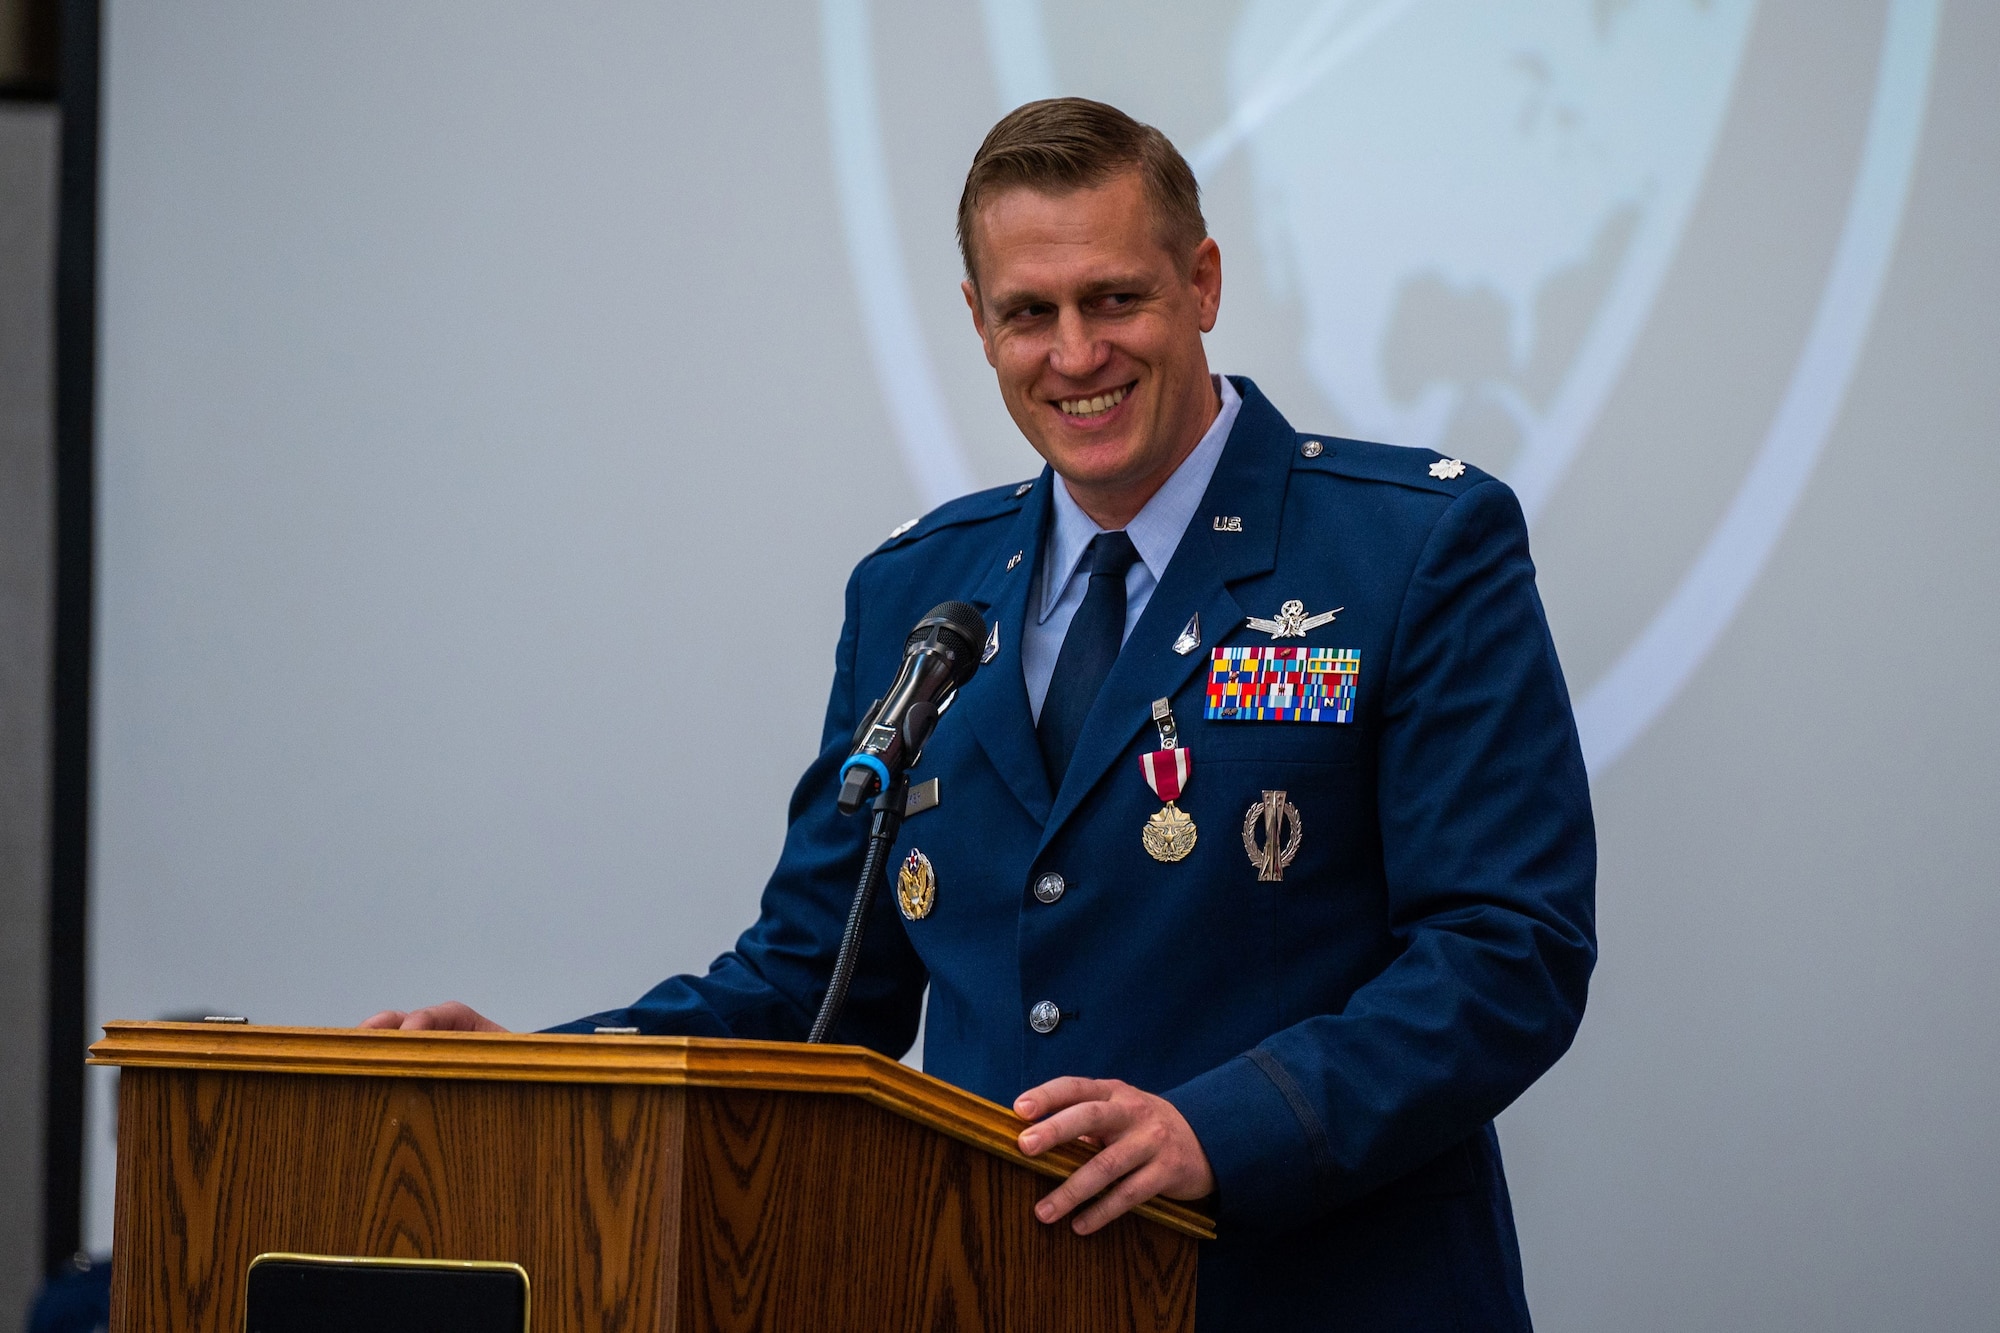 U.S. Space Force Lt. Col. Matthew J. Lintker, outgoing 18th Space Defense Squadron (18 SDS) commander, speaks during the 18 SDS change of command ceremony at Vandenberg Space Force Base, Calif., June 21, 2023. 18 SDS maintains the most complete satellite catalog of Earth-orbiting artificial objects, currently tracking more than 44,400 objects including about 8,200 active spacecraft, which is available to the public on the website www.Space-Track.org. (U.S. Space Force photo by Tech. Sgt. Luke Kitterman)